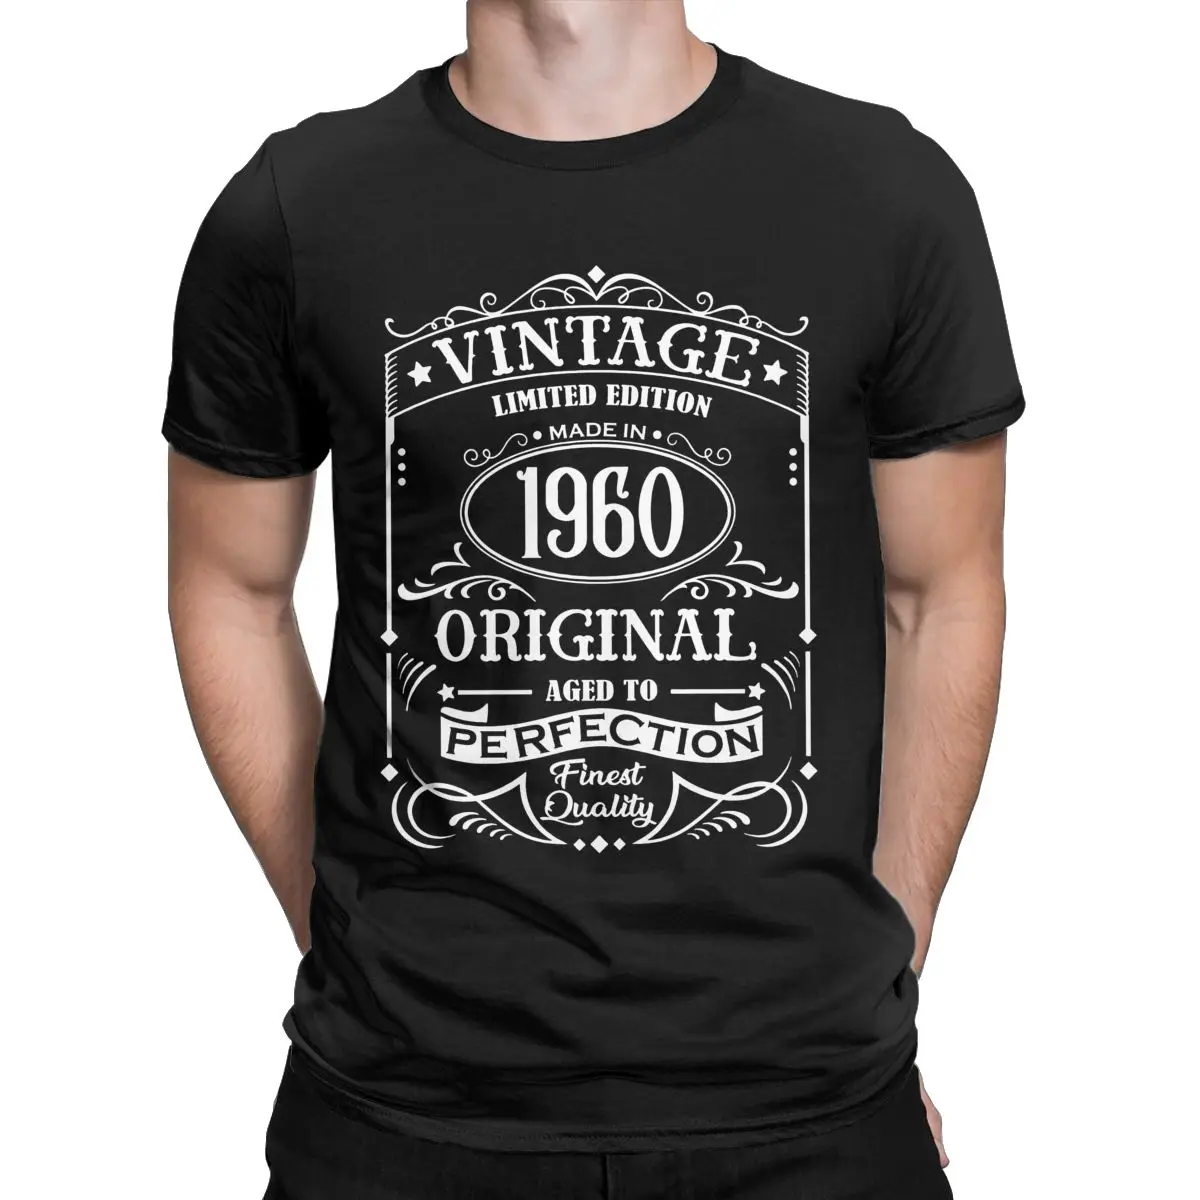 

Born 1960 Birthday Shirt Vintage Limited Edition Original Aged To Perfection 62th Birthday Gift For Men Cotton Printed Tops